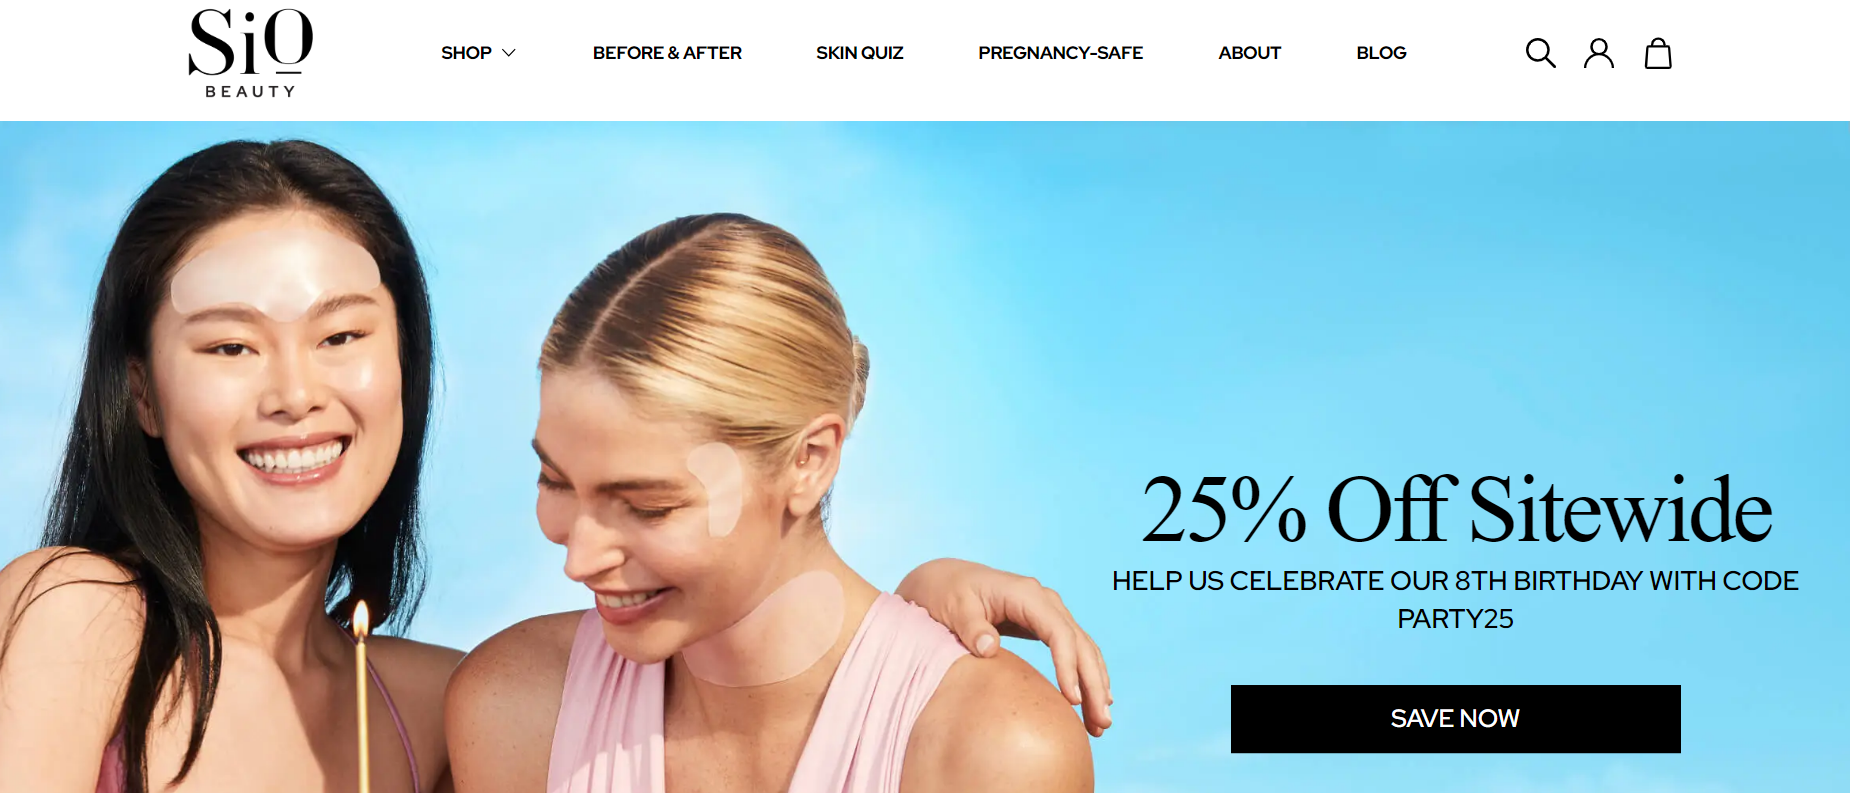 Sio Beauty’s landing page and email
